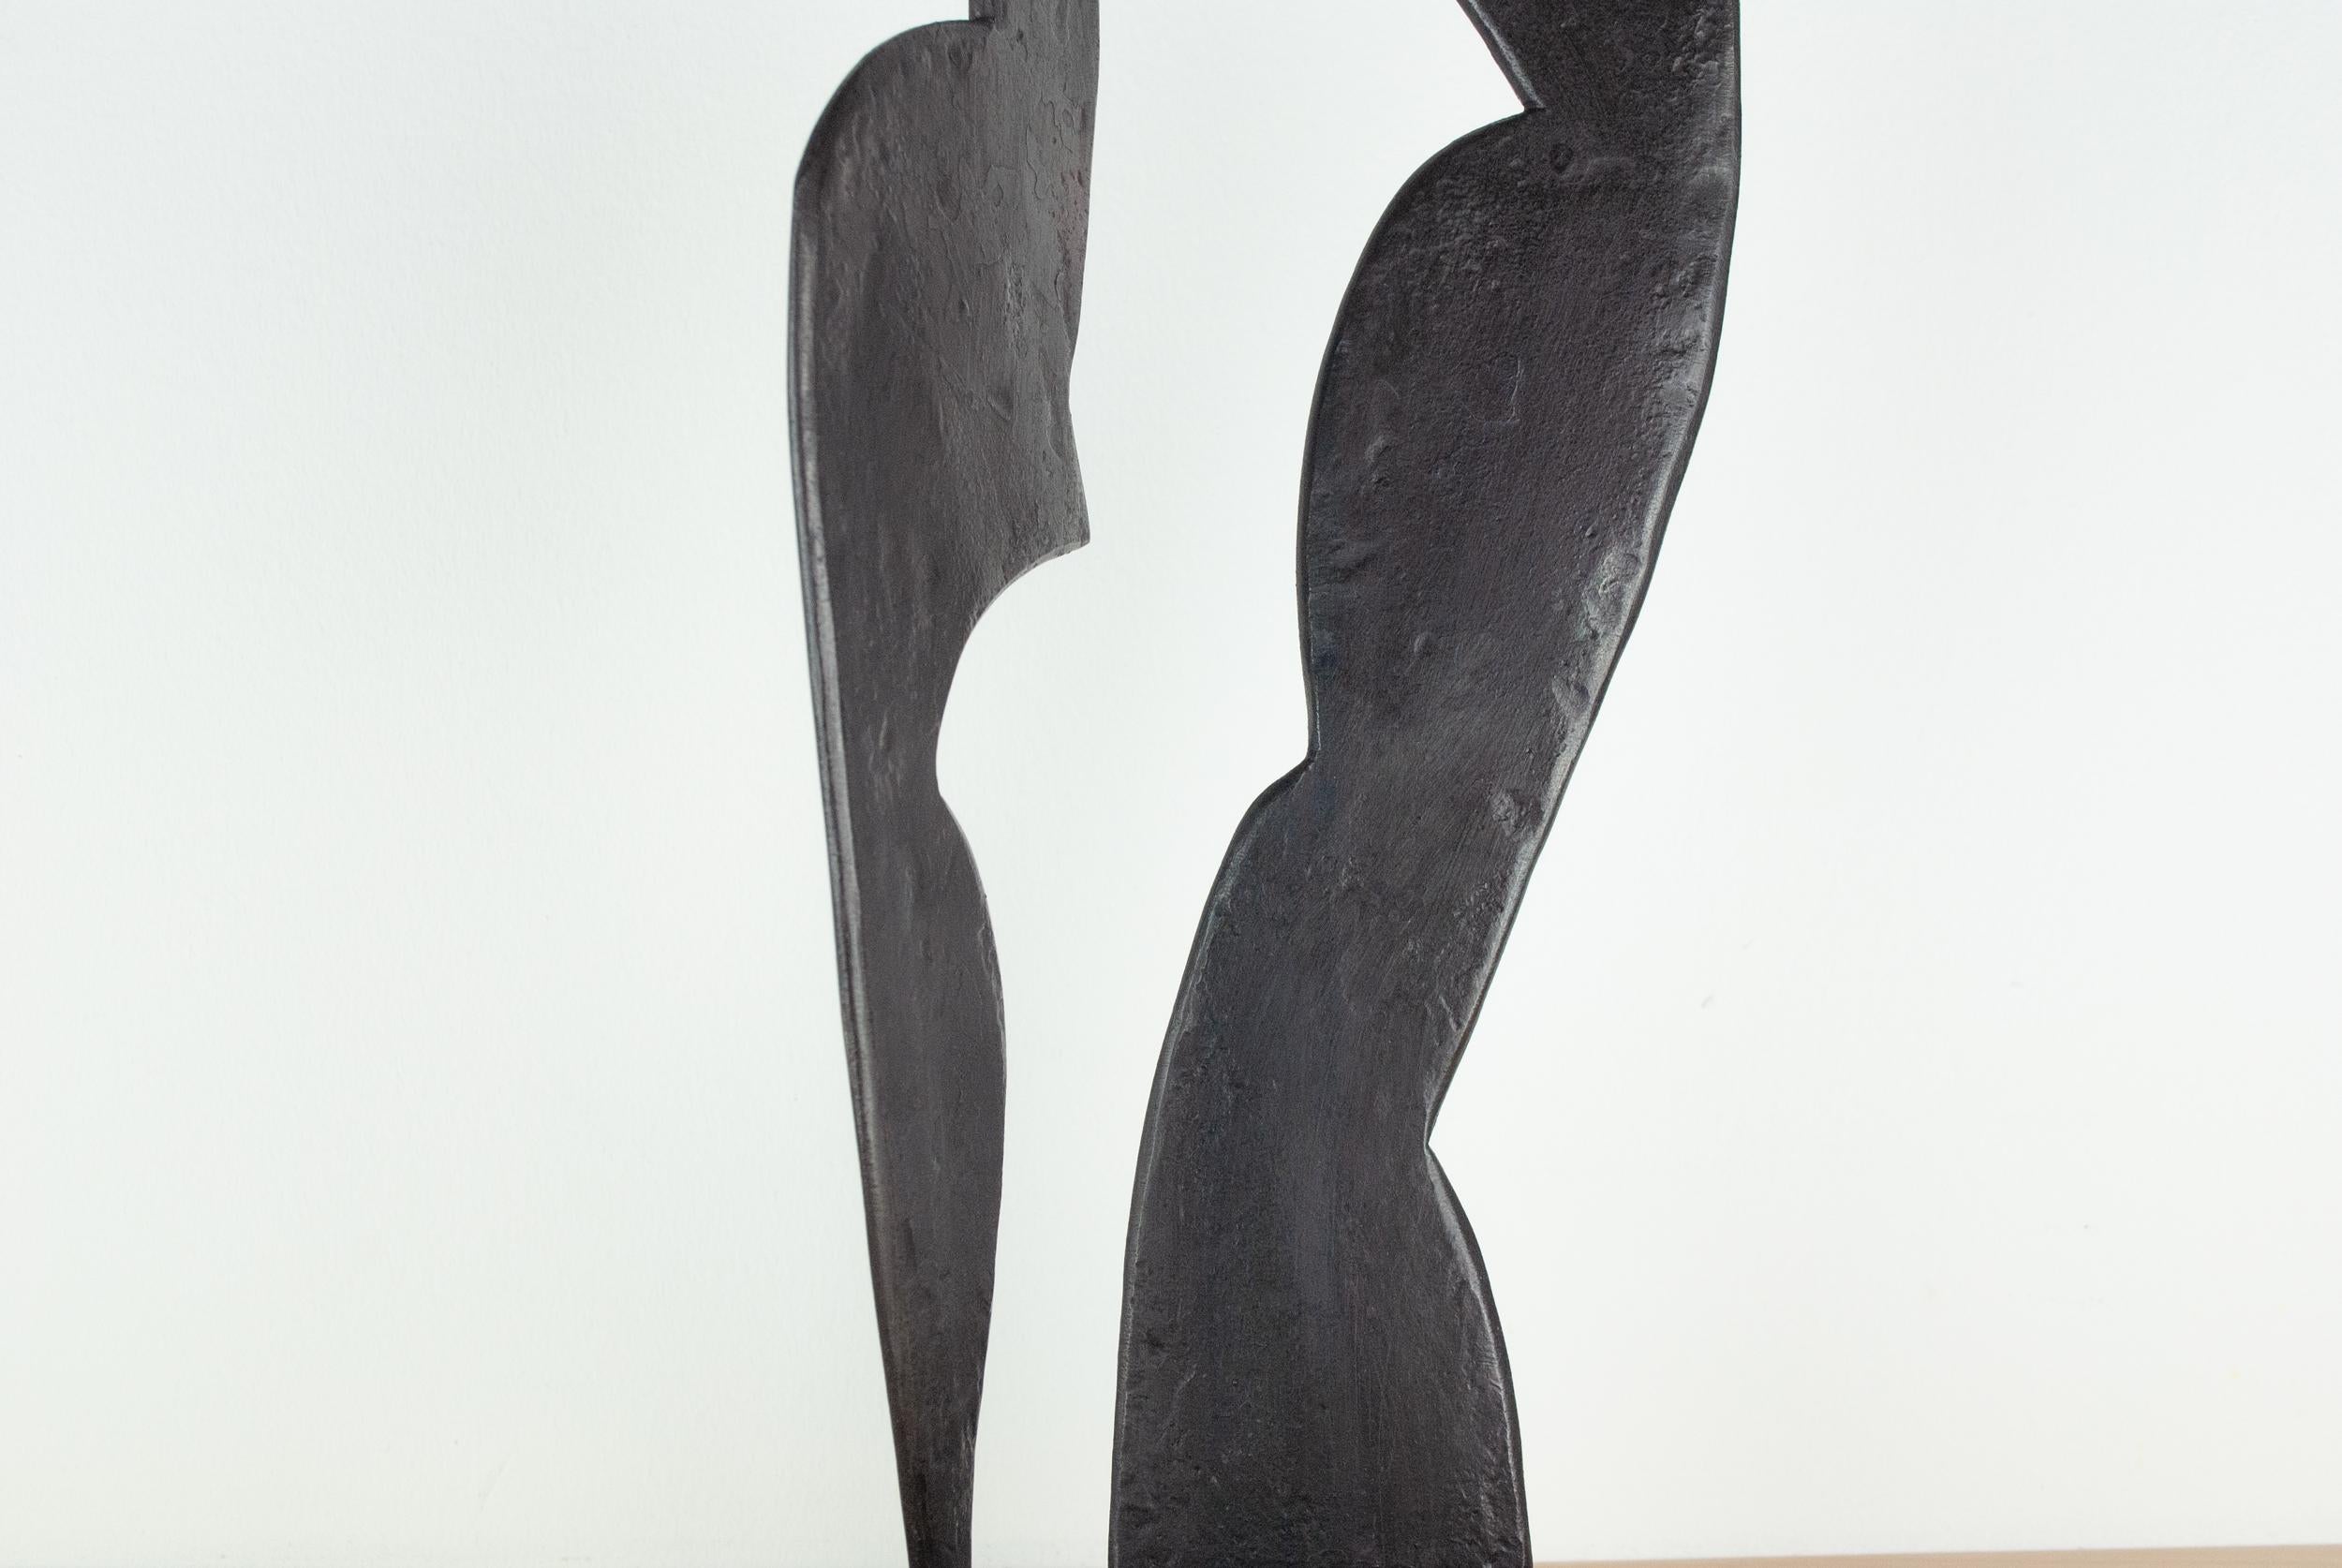 Contemporary Black Forged Steel Sculpture Inspired by H. Bertoia - Two Forms 02 (Britisch) im Angebot